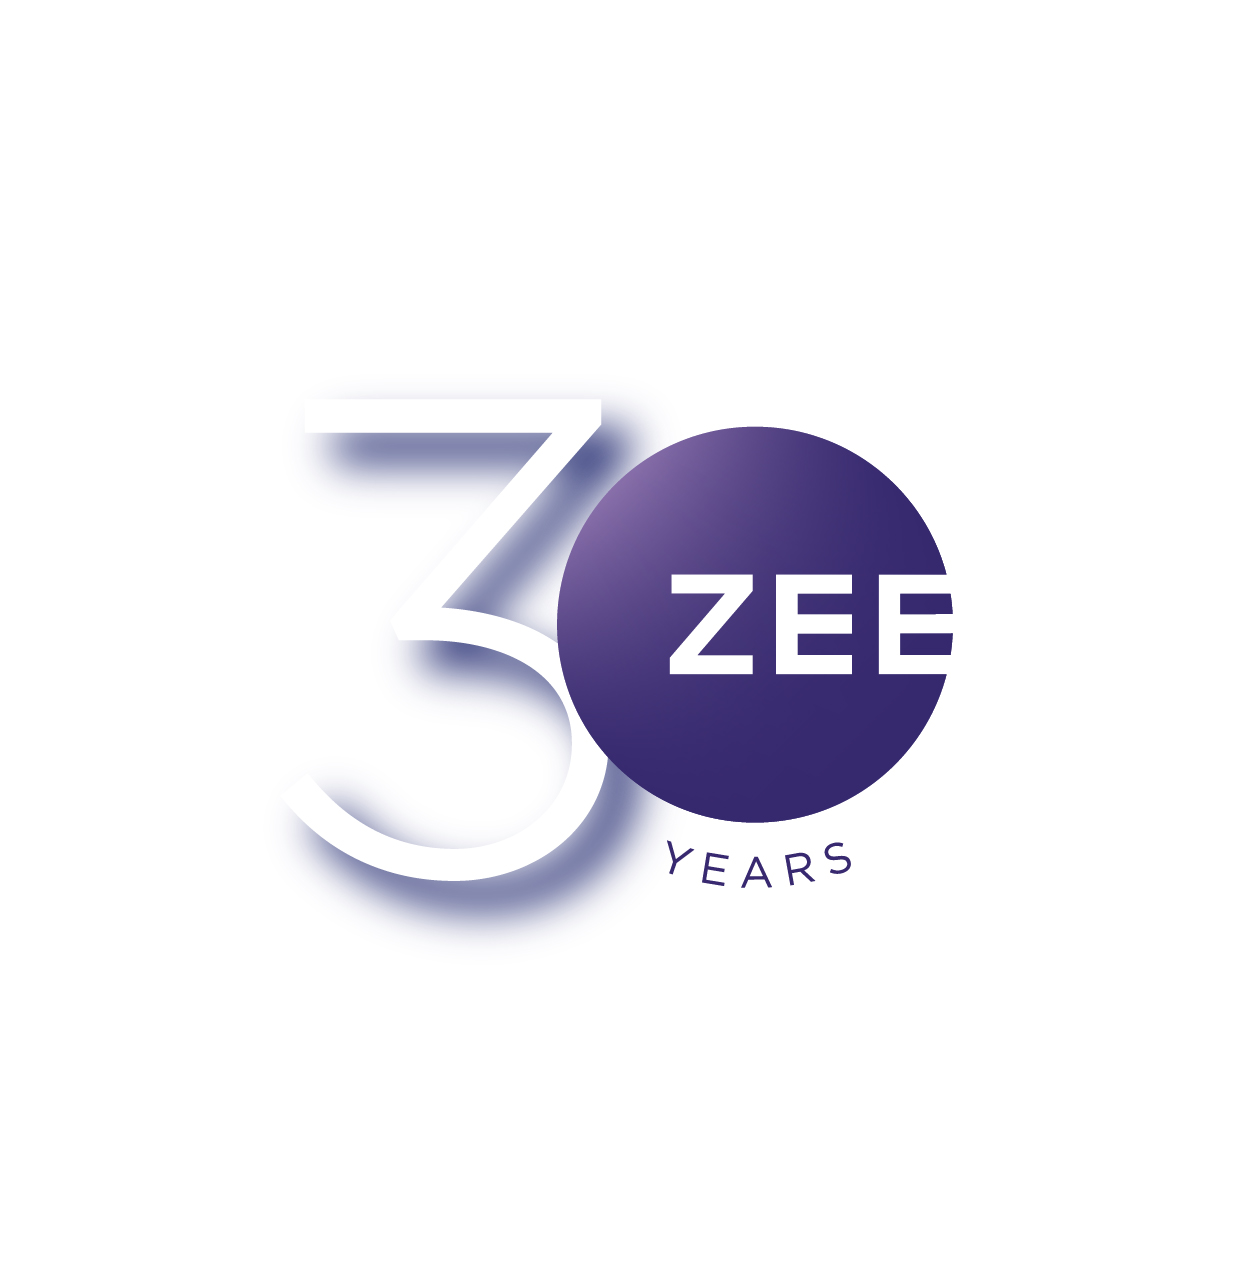 ZEE Touts Growth with “Local for Local” Strategy